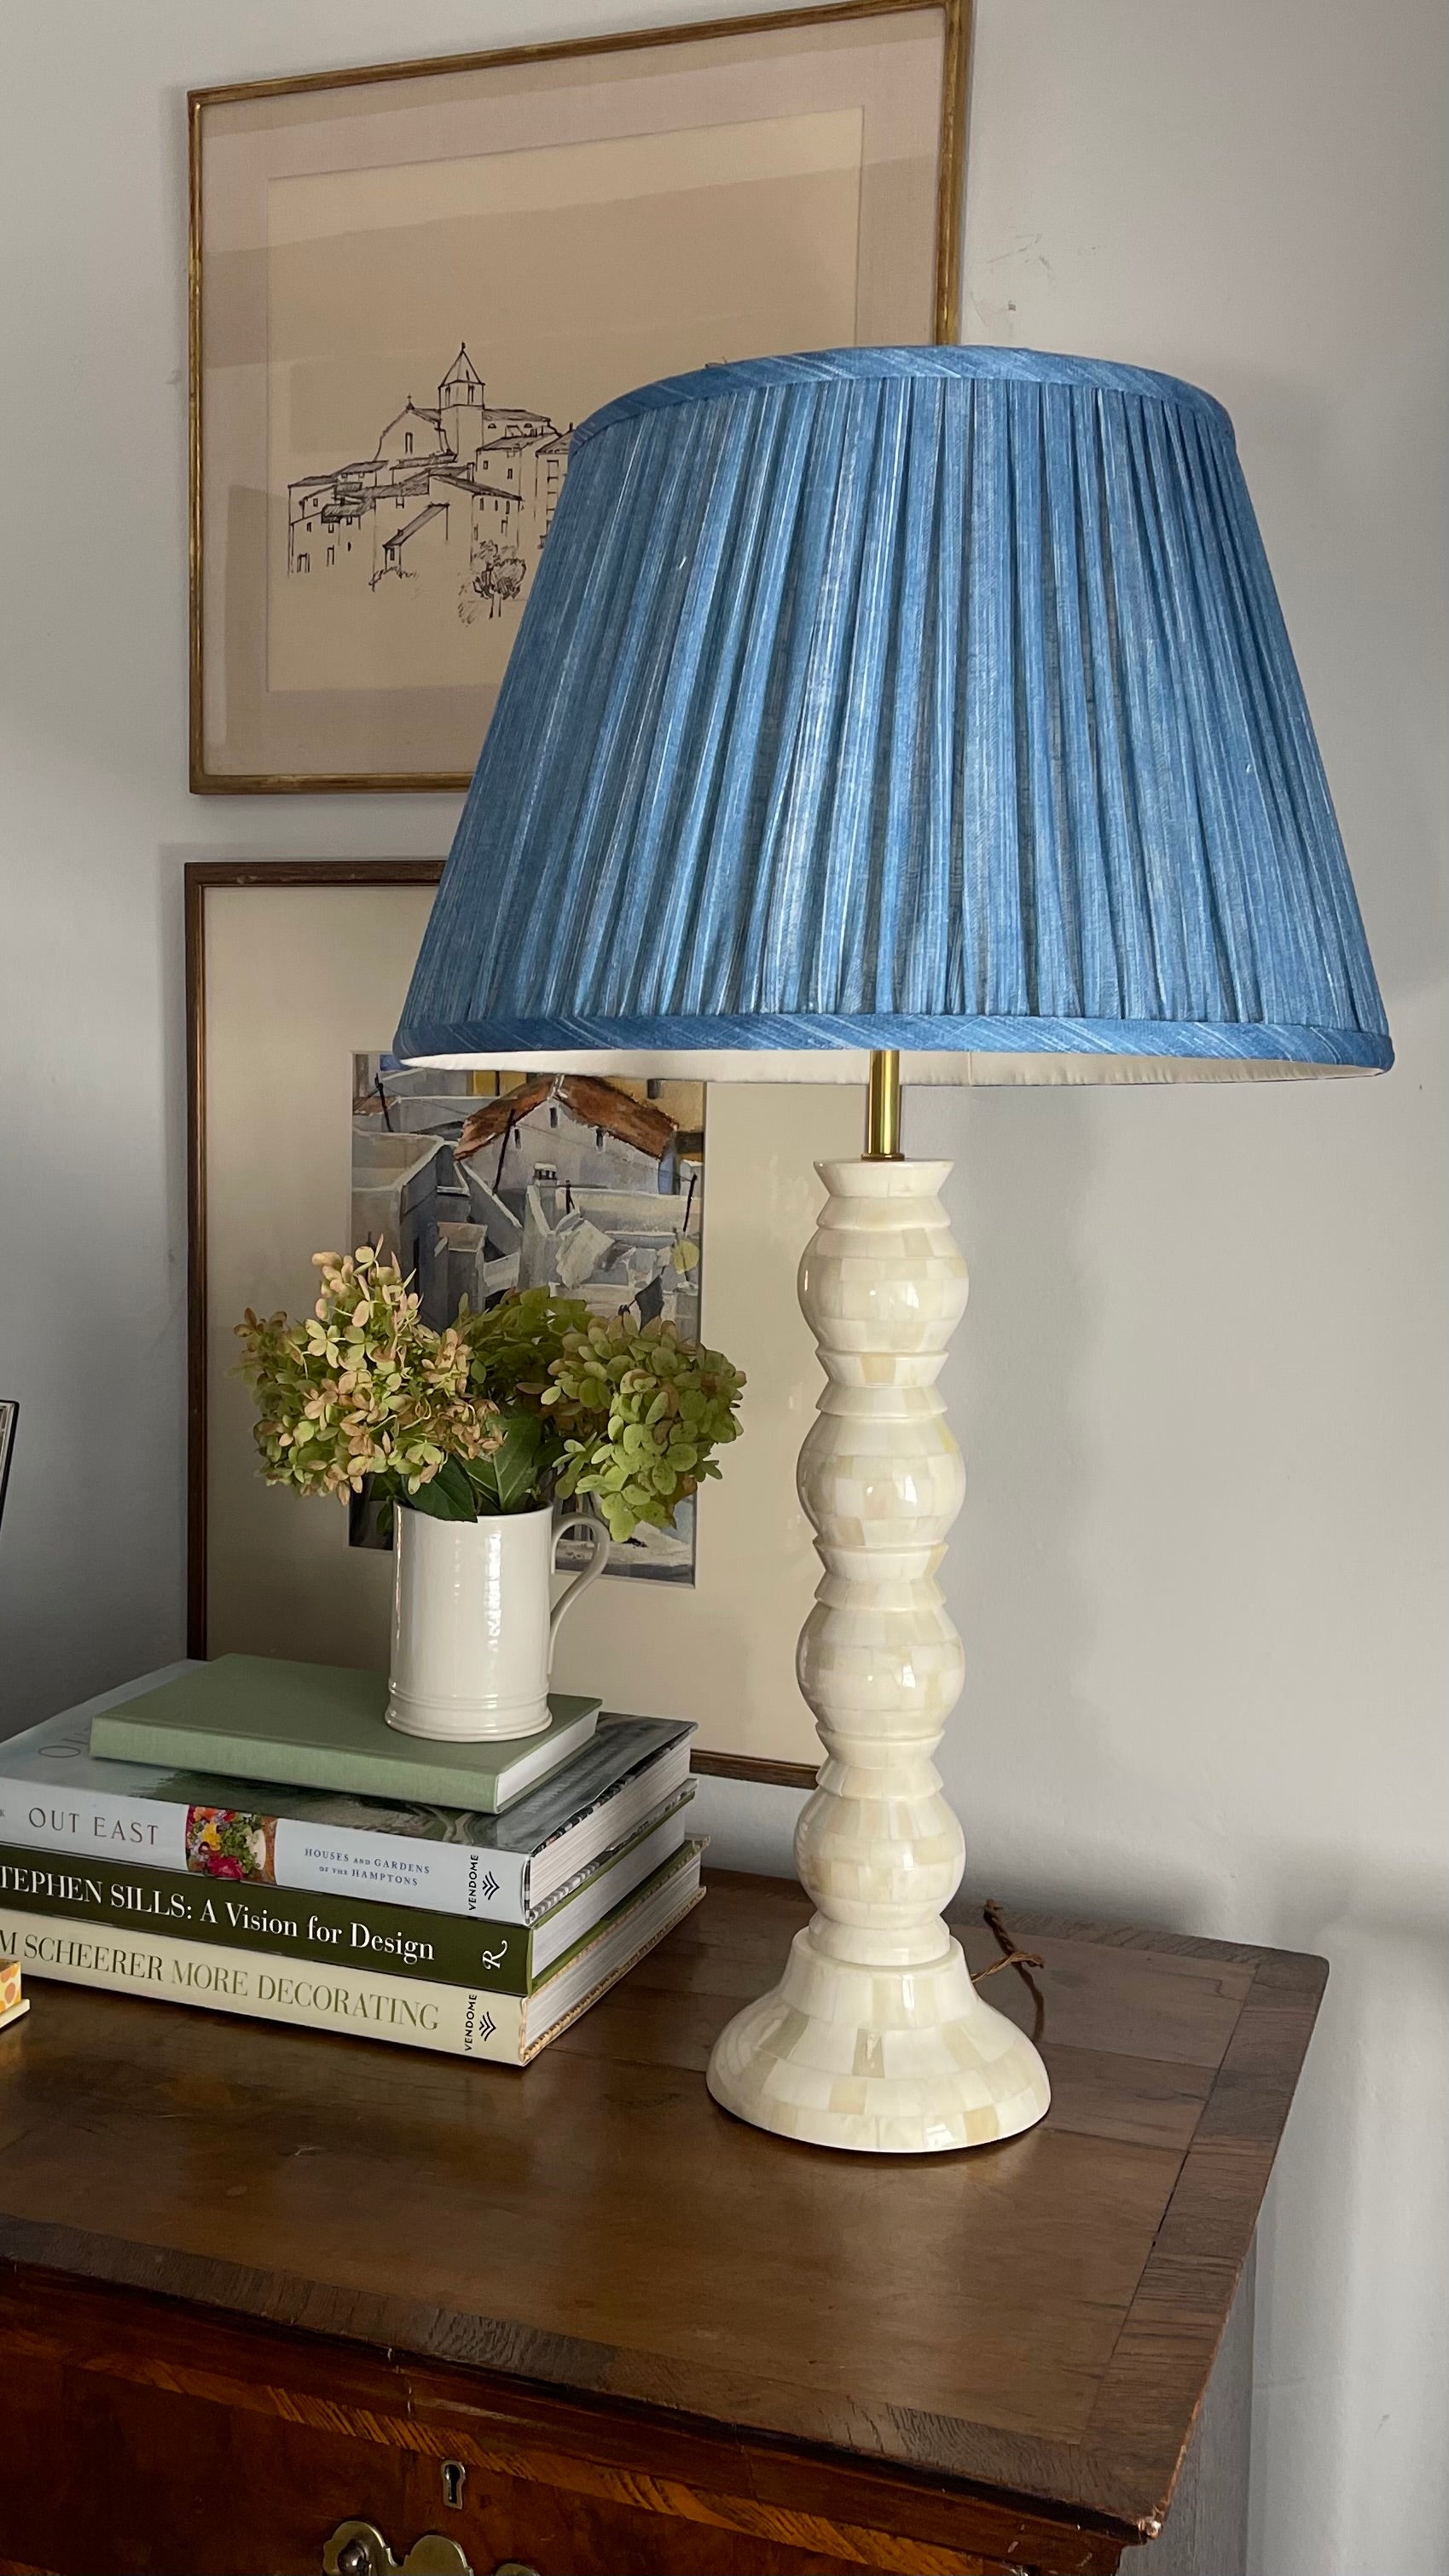 The best place to order Penny Morrison Table Lamps